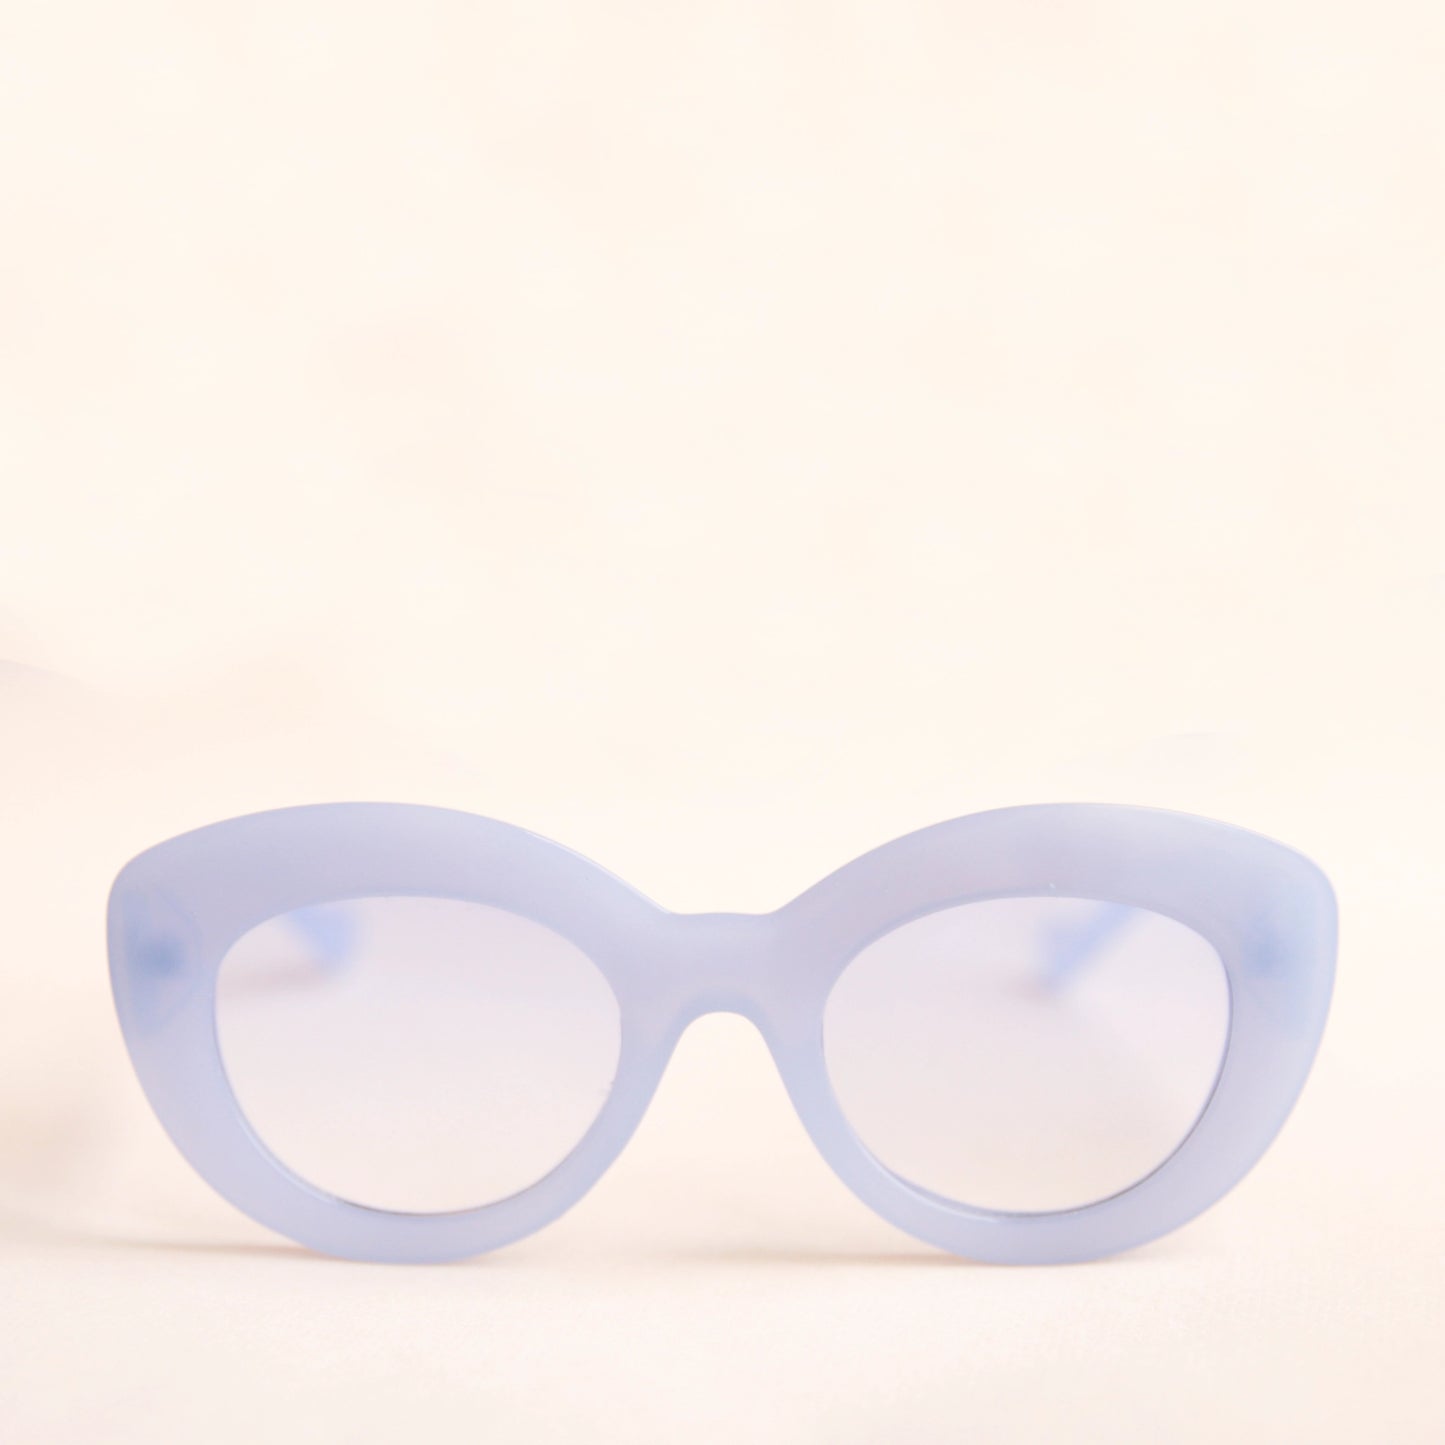 On a neutral background is the Gemma Sunglasses in a light blue shade. They have a rounded shape with a slight cateye flair at the corners. The frame material is a durable plastic and the lenses are a similar tone.